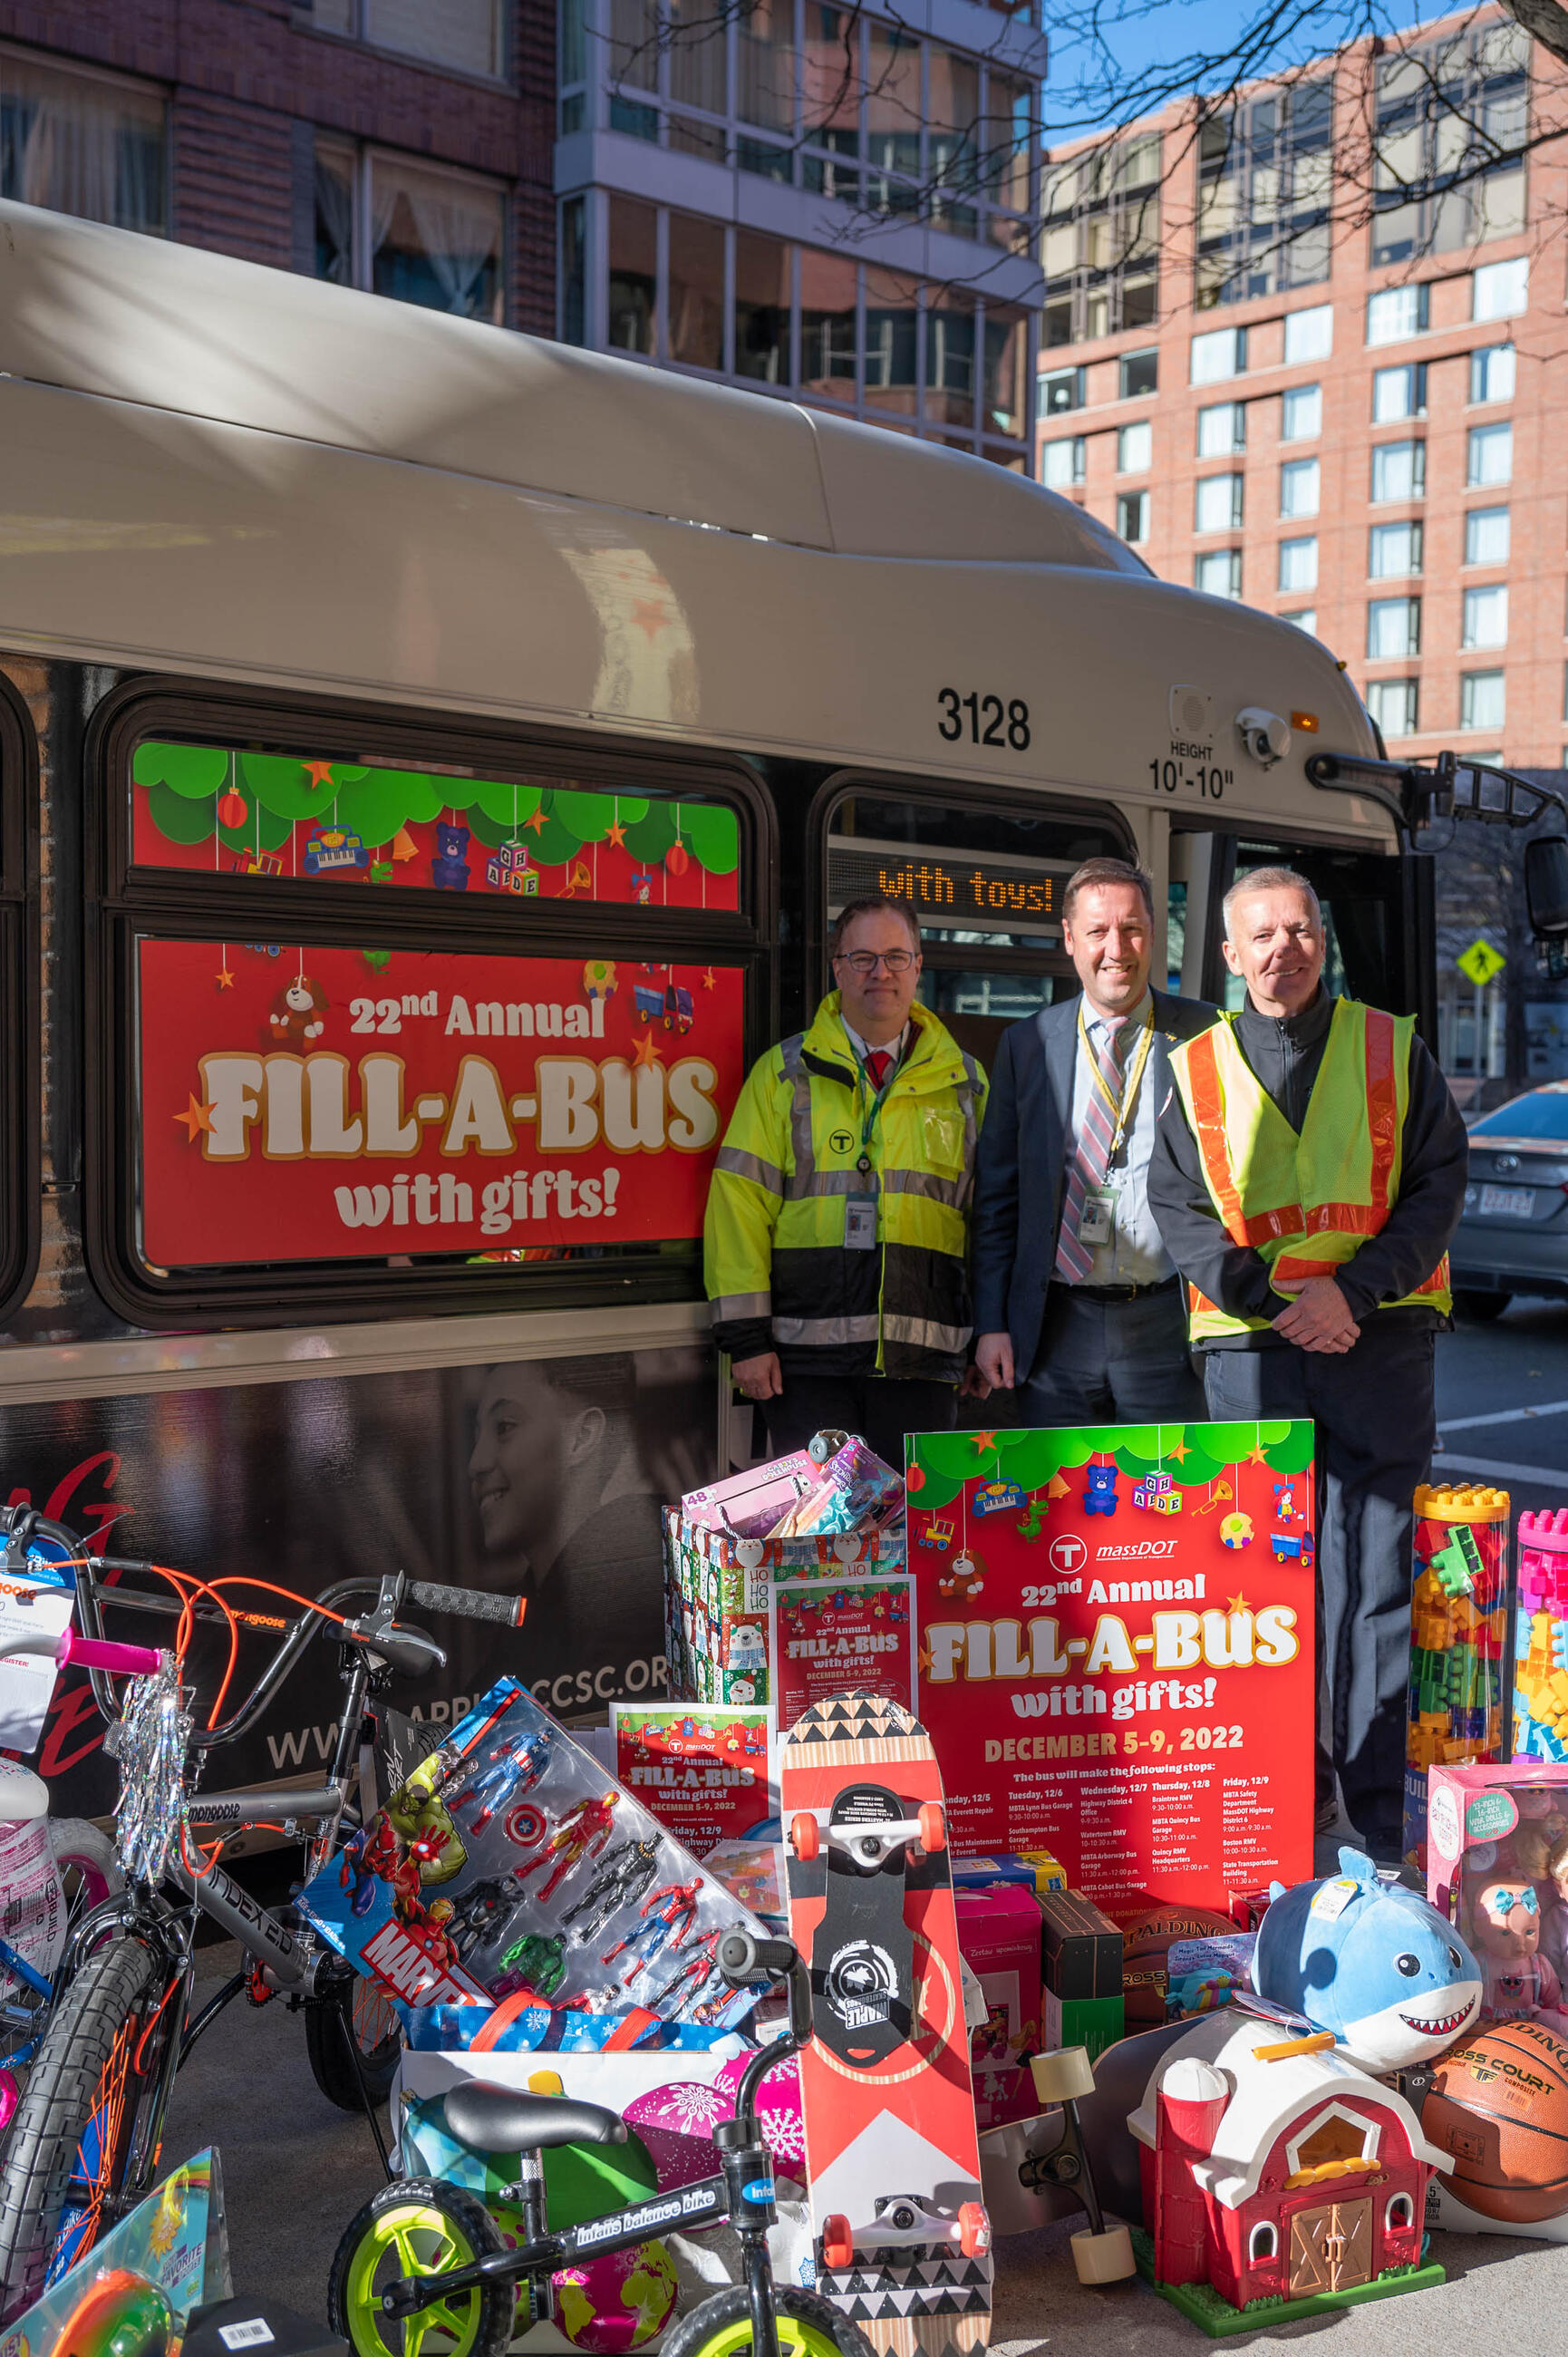 Left to Right: MBTA Graphics Design Manager David Wood, who has organized the Fill-A-Bus with Gifts event for the last five years; MBTA General Manager Steve Poftak; and MBTA Bus Operator Mike Broderick, who drives the holiday bus route each year.